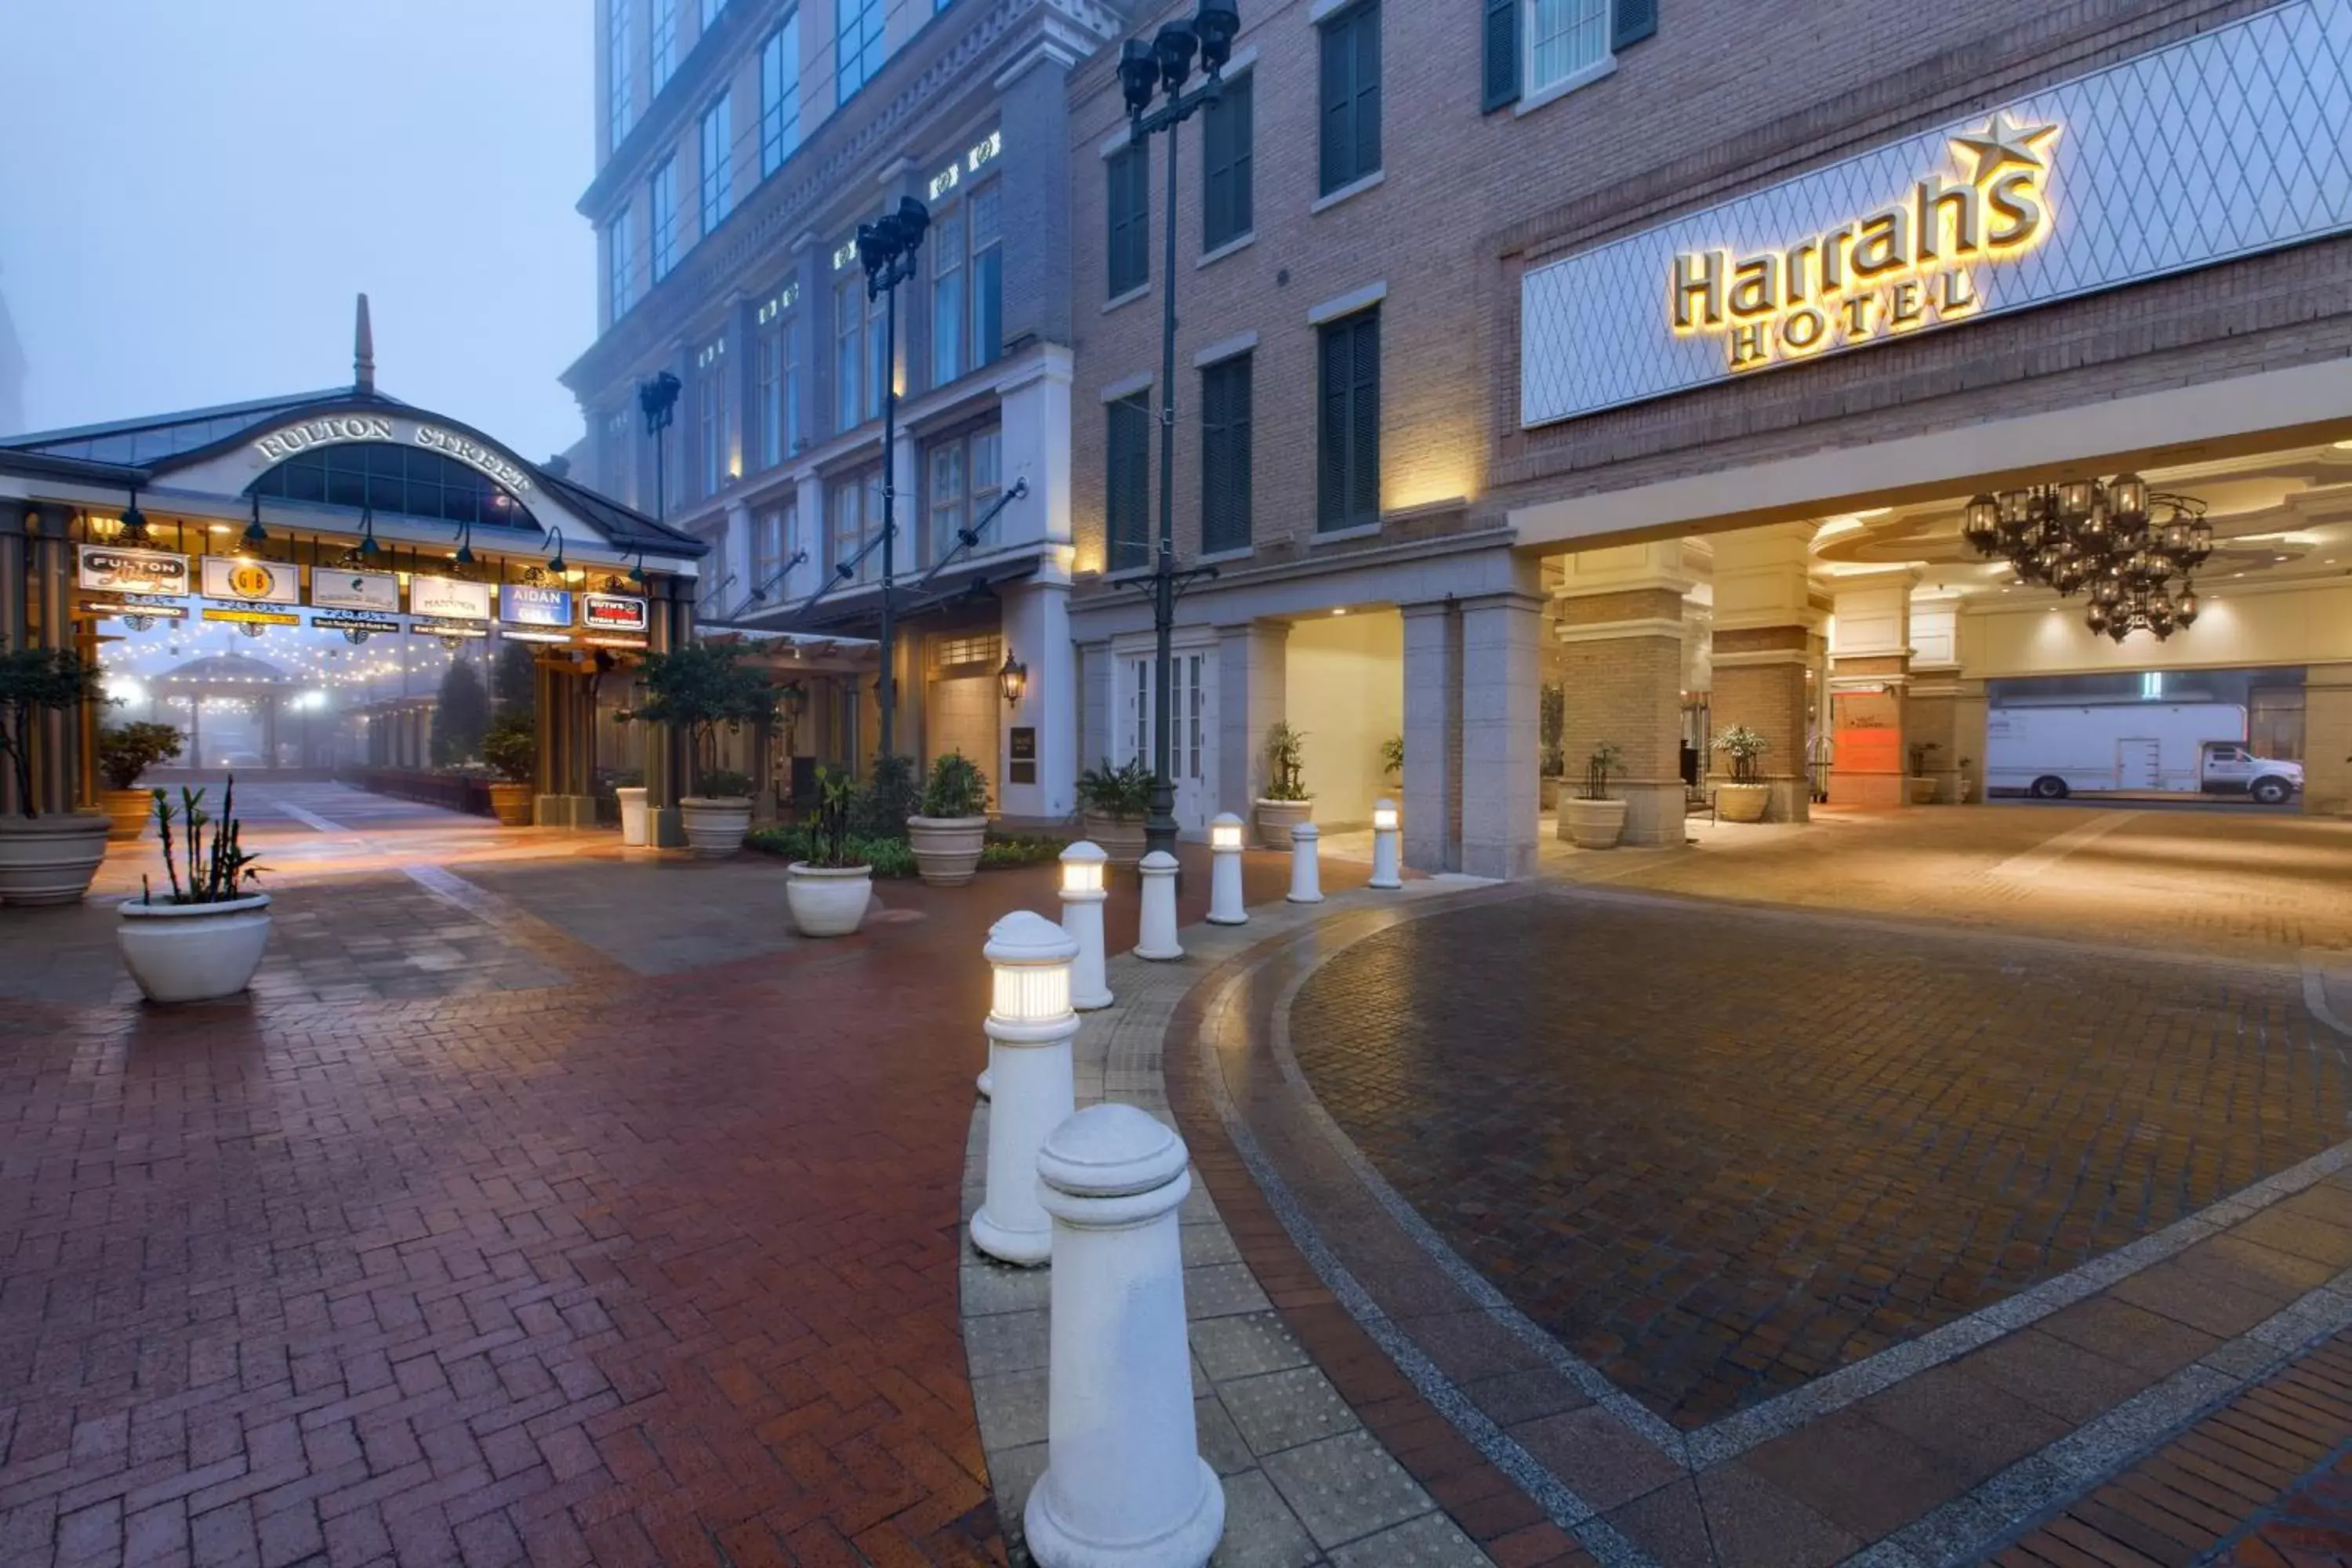 Area and facilities in Harrah's New Orleans Hotel & Casino